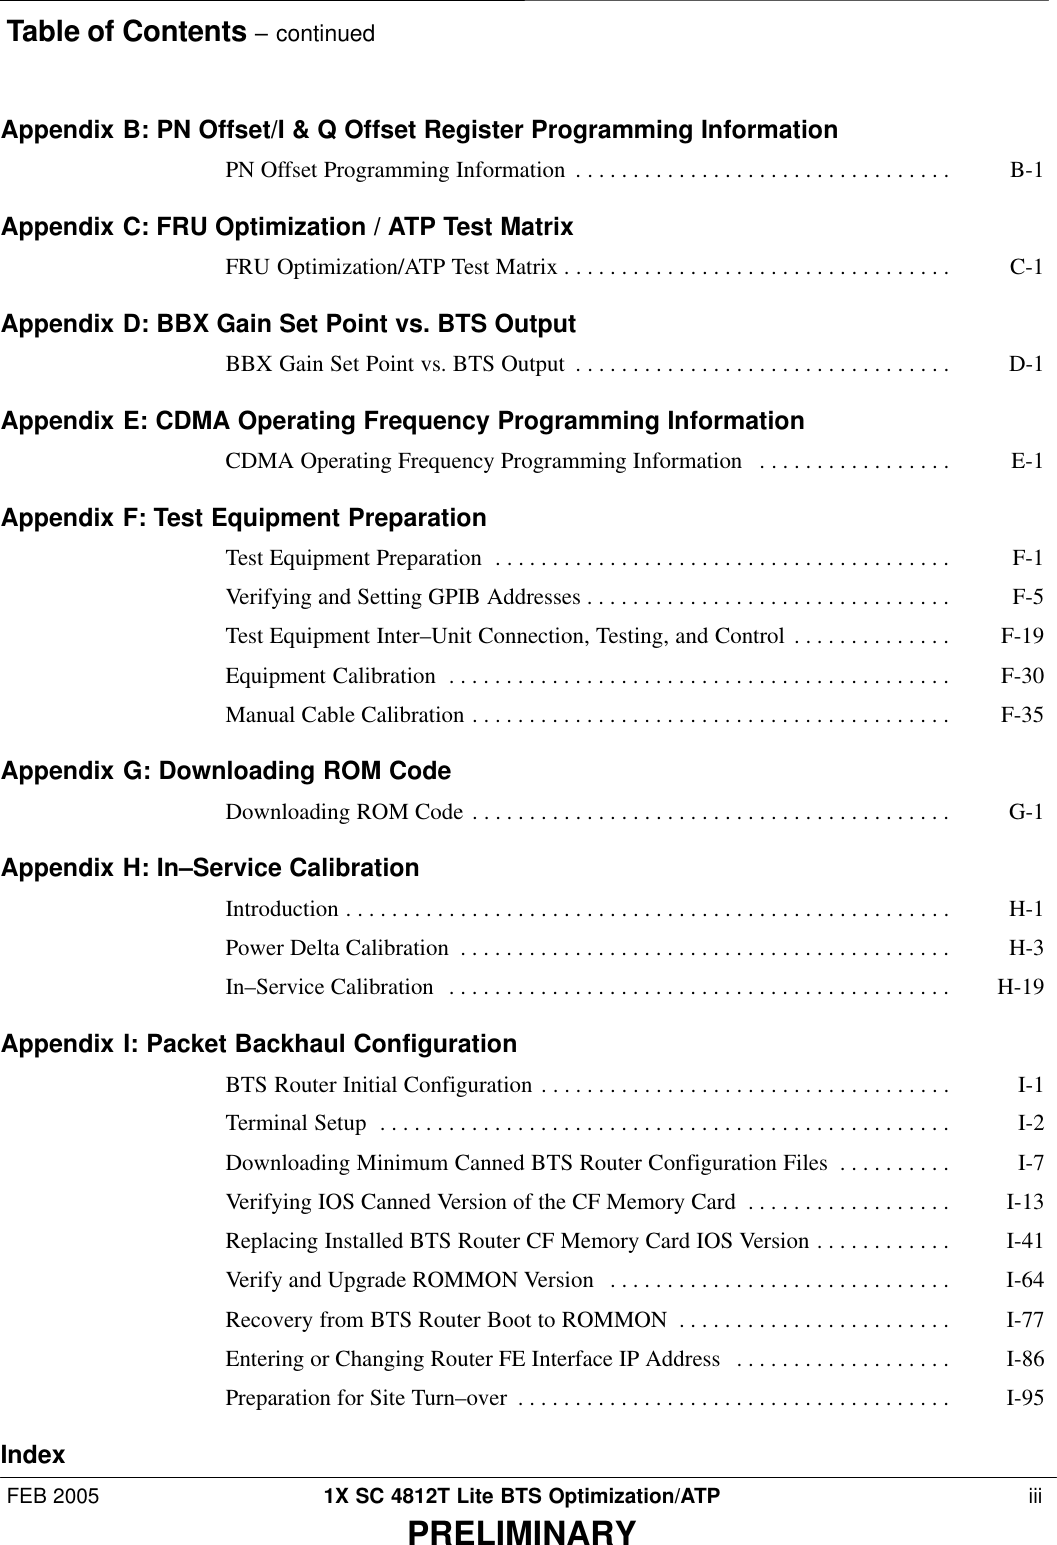 Table of Contents – continuedFEB 2005 1X SC 4812T Lite BTS Optimization/ATP  iiiPRELIMINARYAppendix B: PN Offset/I &amp; Q Offset Register Programming InformationPN Offset Programming Information B-1 . . . . . . . . . . . . . . . . . . . . . . . . . . . . . . . . . Appendix C: FRU Optimization / ATP Test MatrixFRU Optimization/ATP Test Matrix C-1 . . . . . . . . . . . . . . . . . . . . . . . . . . . . . . . . . . Appendix D: BBX Gain Set Point vs. BTS OutputBBX Gain Set Point vs. BTS Output D-1 . . . . . . . . . . . . . . . . . . . . . . . . . . . . . . . . . Appendix E: CDMA Operating Frequency Programming InformationCDMA Operating Frequency Programming Information E-1 . . . . . . . . . . . . . . . . . Appendix F: Test Equipment PreparationTest Equipment Preparation F-1 . . . . . . . . . . . . . . . . . . . . . . . . . . . . . . . . . . . . . . . . Verifying and Setting GPIB Addresses F-5 . . . . . . . . . . . . . . . . . . . . . . . . . . . . . . . . Test Equipment Inter–Unit Connection, Testing, and Control F-19 . . . . . . . . . . . . . . Equipment Calibration F-30 . . . . . . . . . . . . . . . . . . . . . . . . . . . . . . . . . . . . . . . . . . . . Manual Cable Calibration F-35 . . . . . . . . . . . . . . . . . . . . . . . . . . . . . . . . . . . . . . . . . . Appendix G: Downloading ROM CodeDownloading ROM Code G-1 . . . . . . . . . . . . . . . . . . . . . . . . . . . . . . . . . . . . . . . . . . Appendix H: In–Service CalibrationIntroduction H-1 . . . . . . . . . . . . . . . . . . . . . . . . . . . . . . . . . . . . . . . . . . . . . . . . . . . . . Power Delta Calibration H-3 . . . . . . . . . . . . . . . . . . . . . . . . . . . . . . . . . . . . . . . . . . . In–Service Calibration H-19 . . . . . . . . . . . . . . . . . . . . . . . . . . . . . . . . . . . . . . . . . . . . Appendix I: Packet Backhaul ConfigurationBTS Router Initial Configuration I-1 . . . . . . . . . . . . . . . . . . . . . . . . . . . . . . . . . . . . Terminal Setup I-2 . . . . . . . . . . . . . . . . . . . . . . . . . . . . . . . . . . . . . . . . . . . . . . . . . . Downloading Minimum Canned BTS Router Configuration Files I-7 . . . . . . . . . . Verifying IOS Canned Version of the CF Memory Card I-13 . . . . . . . . . . . . . . . . . . Replacing Installed BTS Router CF Memory Card IOS Version I-41 . . . . . . . . . . . . Verify and Upgrade ROMMON Version I-64 . . . . . . . . . . . . . . . . . . . . . . . . . . . . . . Recovery from BTS Router Boot to ROMMON I-77 . . . . . . . . . . . . . . . . . . . . . . . . Entering or Changing Router FE Interface IP Address I-86 . . . . . . . . . . . . . . . . . . . Preparation for Site Turn–over I-95 . . . . . . . . . . . . . . . . . . . . . . . . . . . . . . . . . . . . . . Index